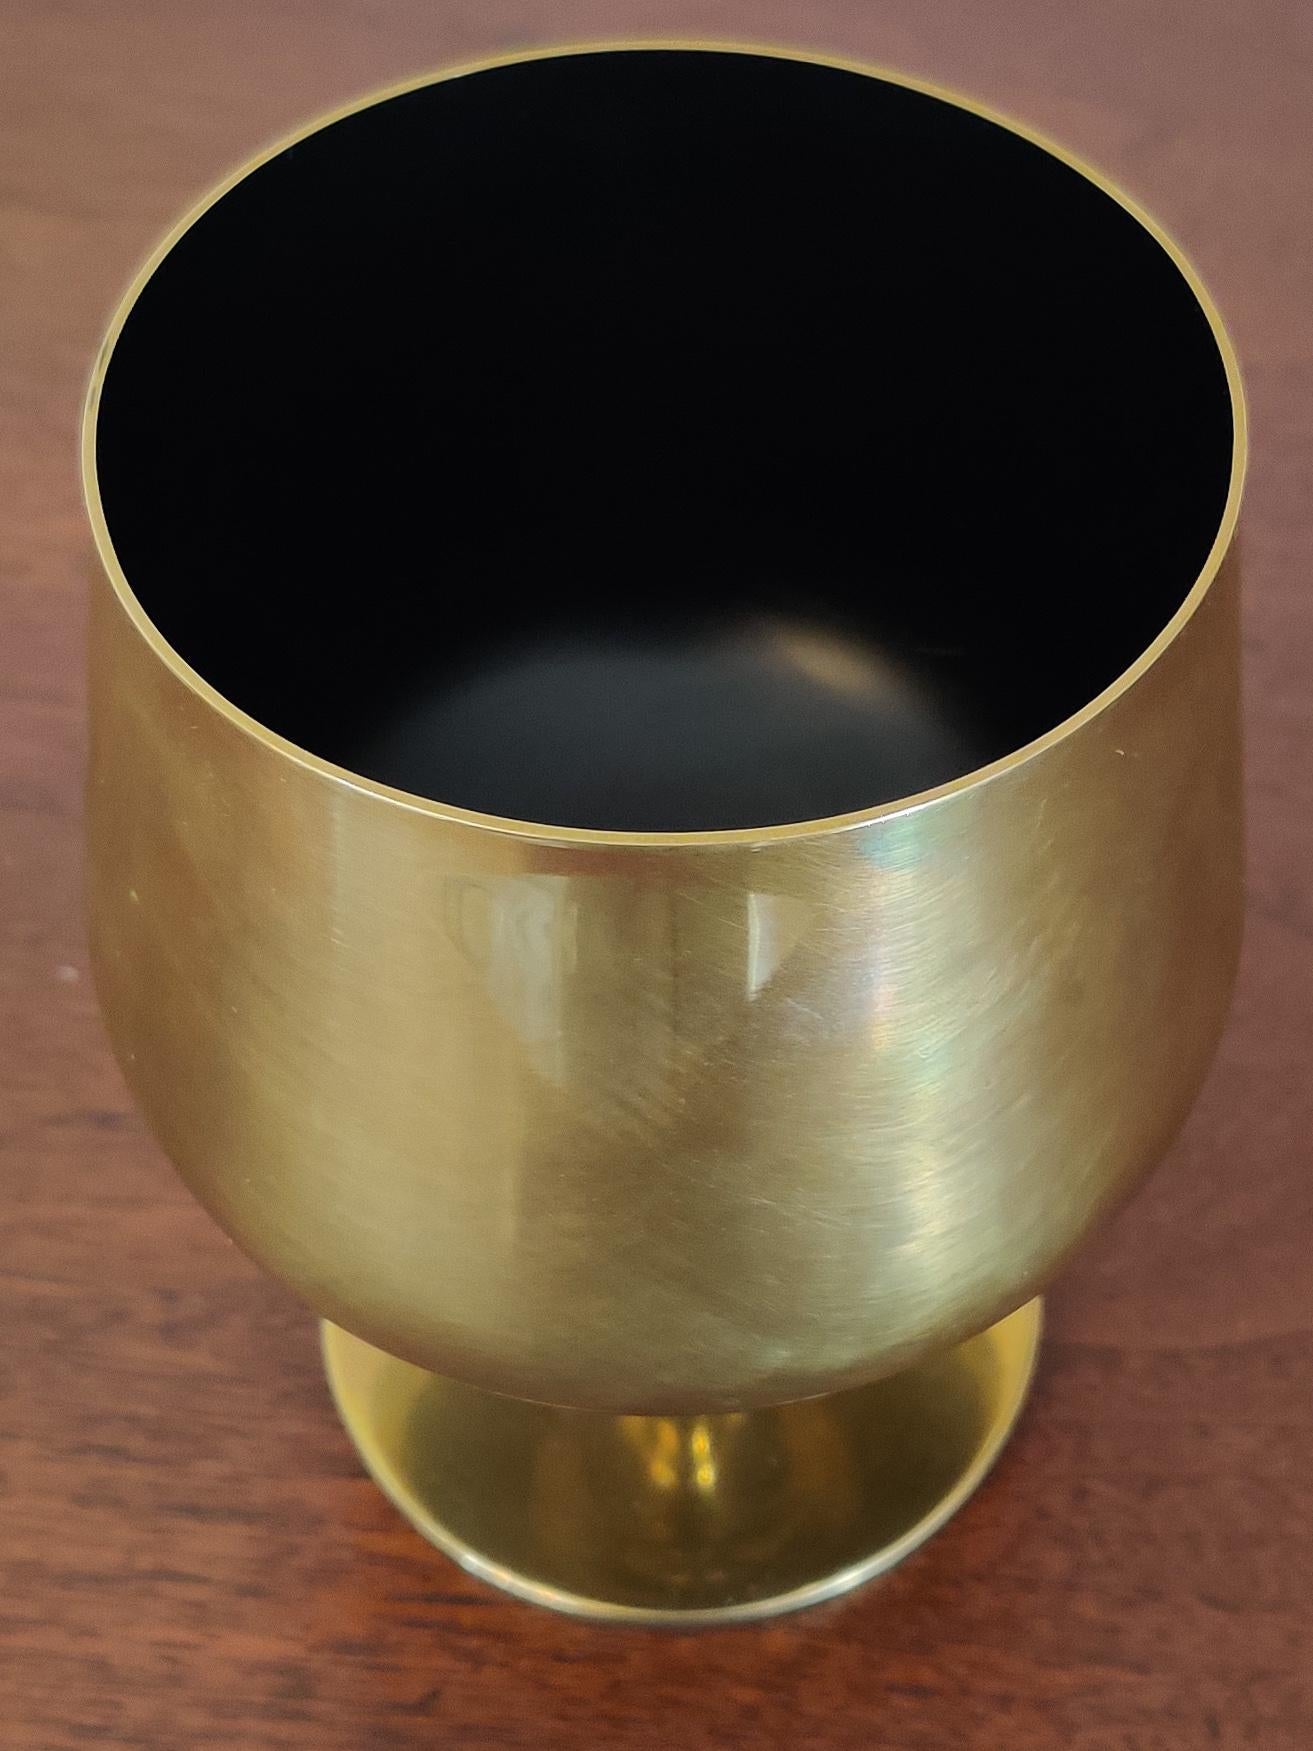 A subtle and spare flower vase in brass designed by Florence Knoll. Original label and finish. Only produced in brass.

Condition is very good. Interior has virtually no damage and outside has mild scuffs and scratches, pictured.